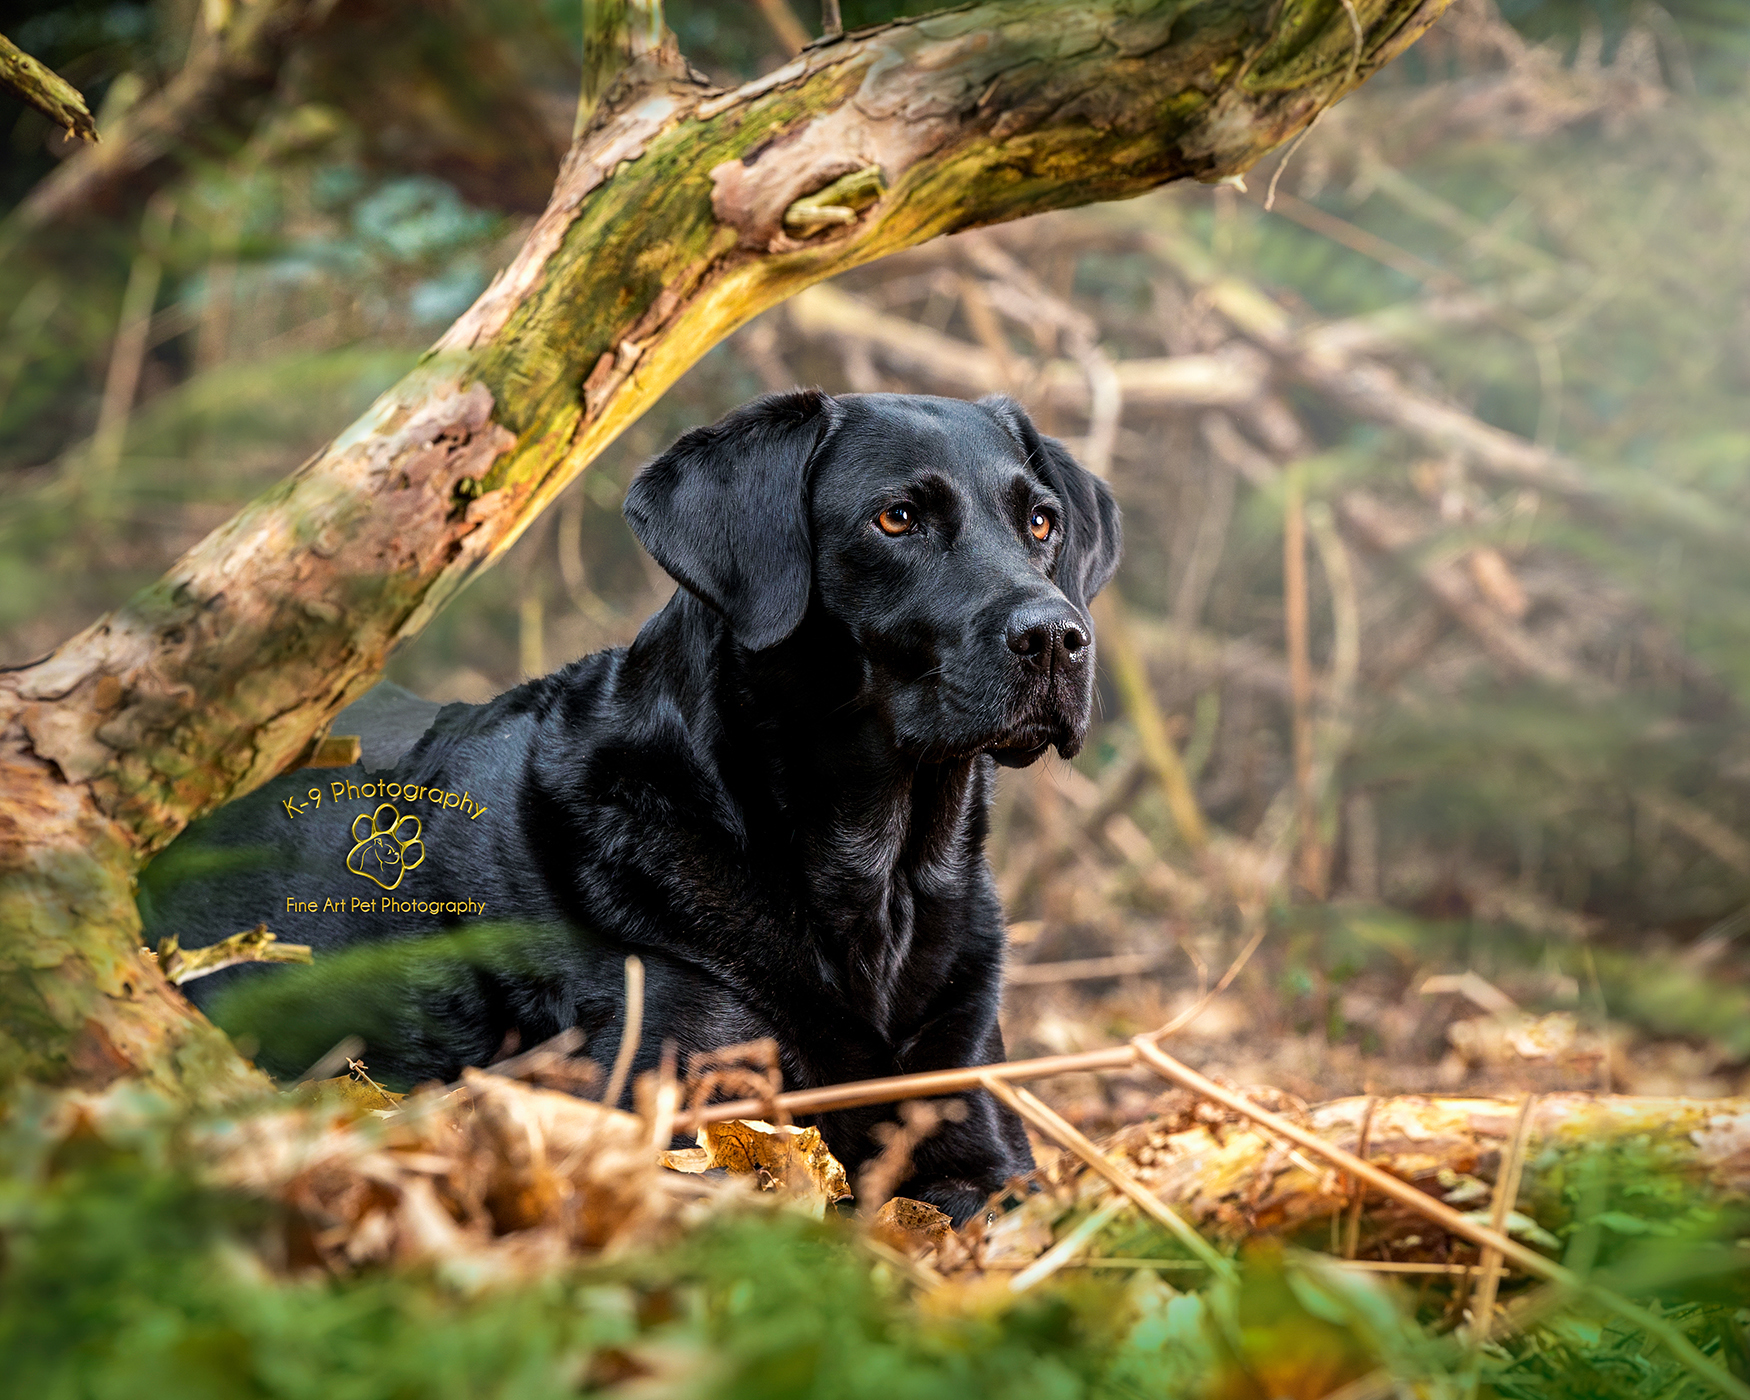 dog photography covering Cambridge, Hertford and London, fun portraits of your dog taken by UK dog photographer Adrian Bullers and K-9 Photography - Saffie the Black Labradoor on location in Bedfordshire